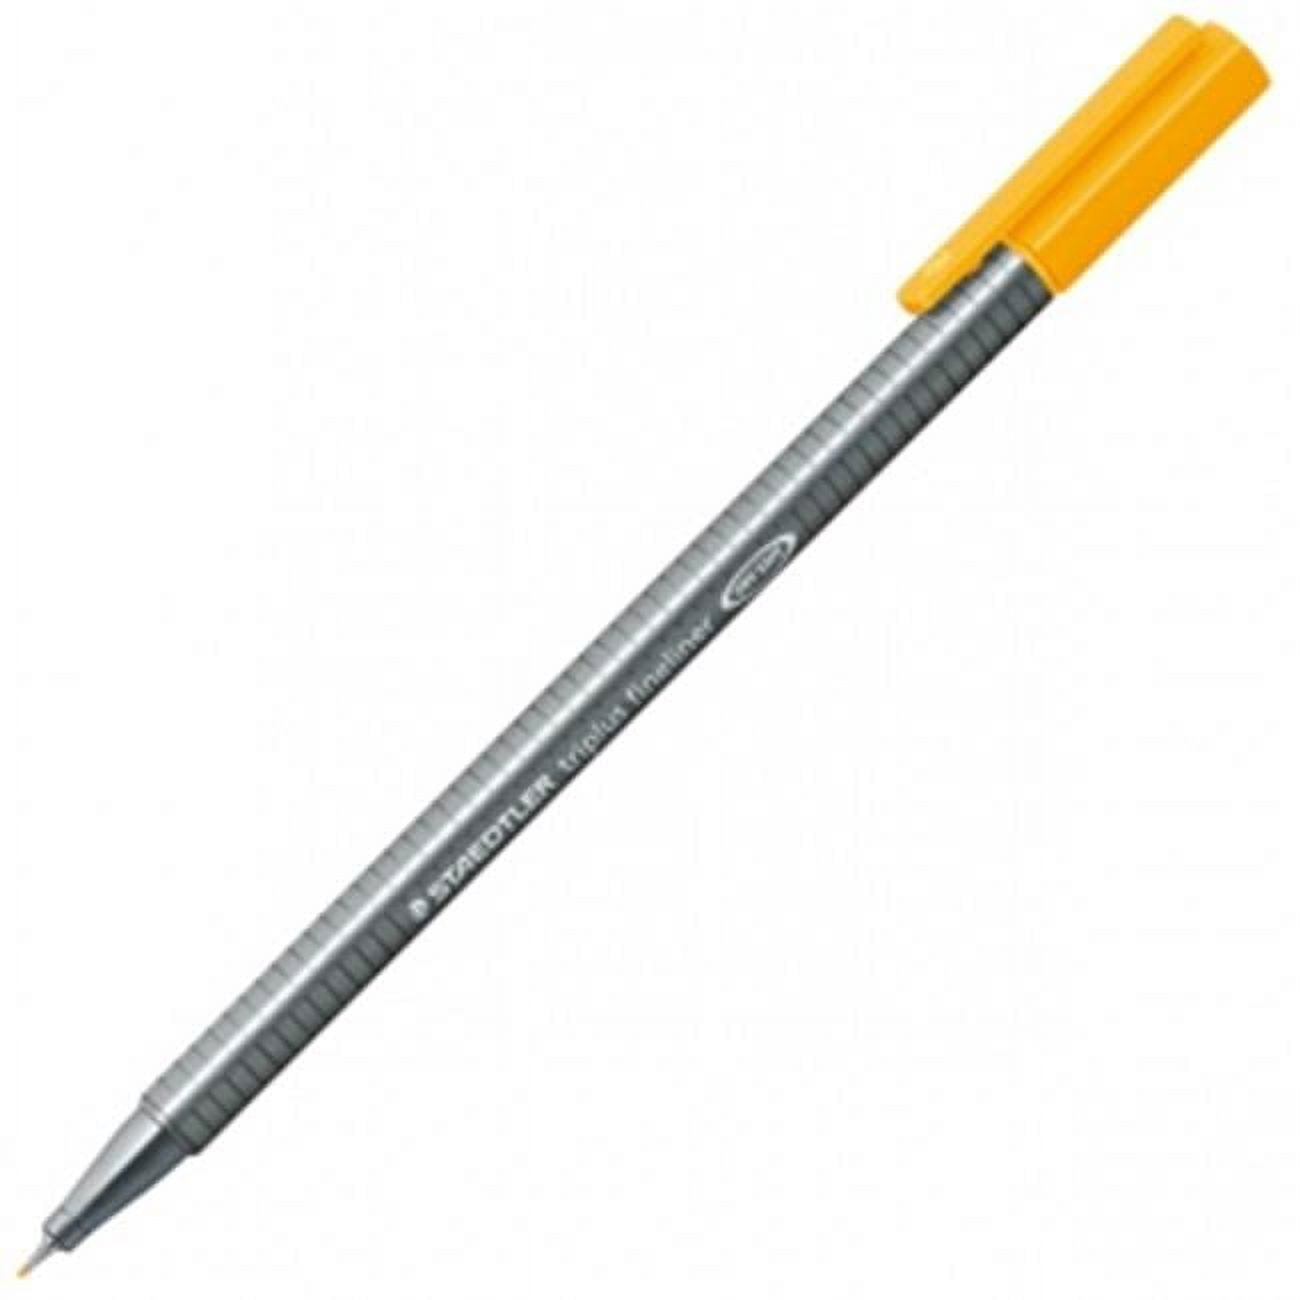  Fineliners - Fineliners / Pens & Refills: Stationery & Office  Supplies